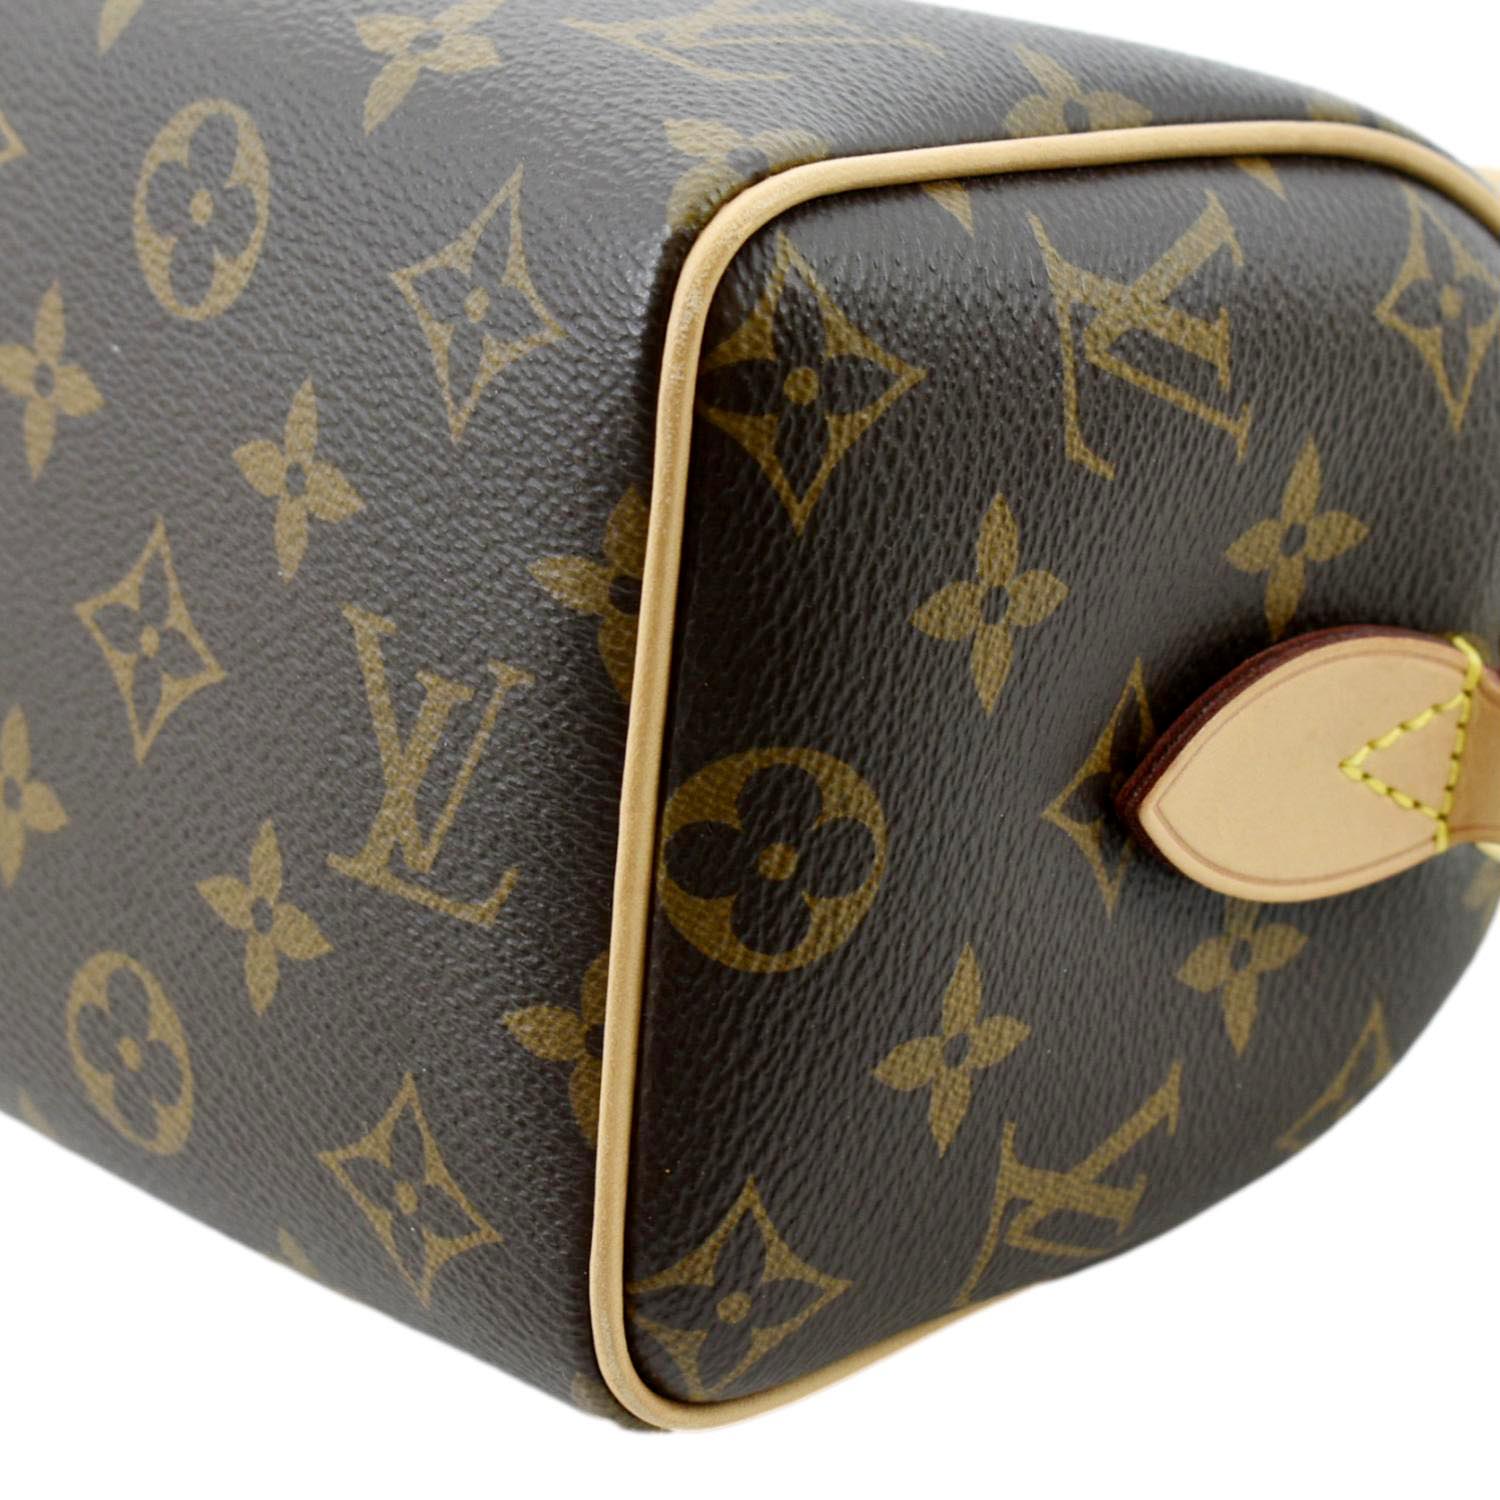 Louis Vuitton Speedy Bandouliere Monogram 25 Brown in Coated Canvas - US